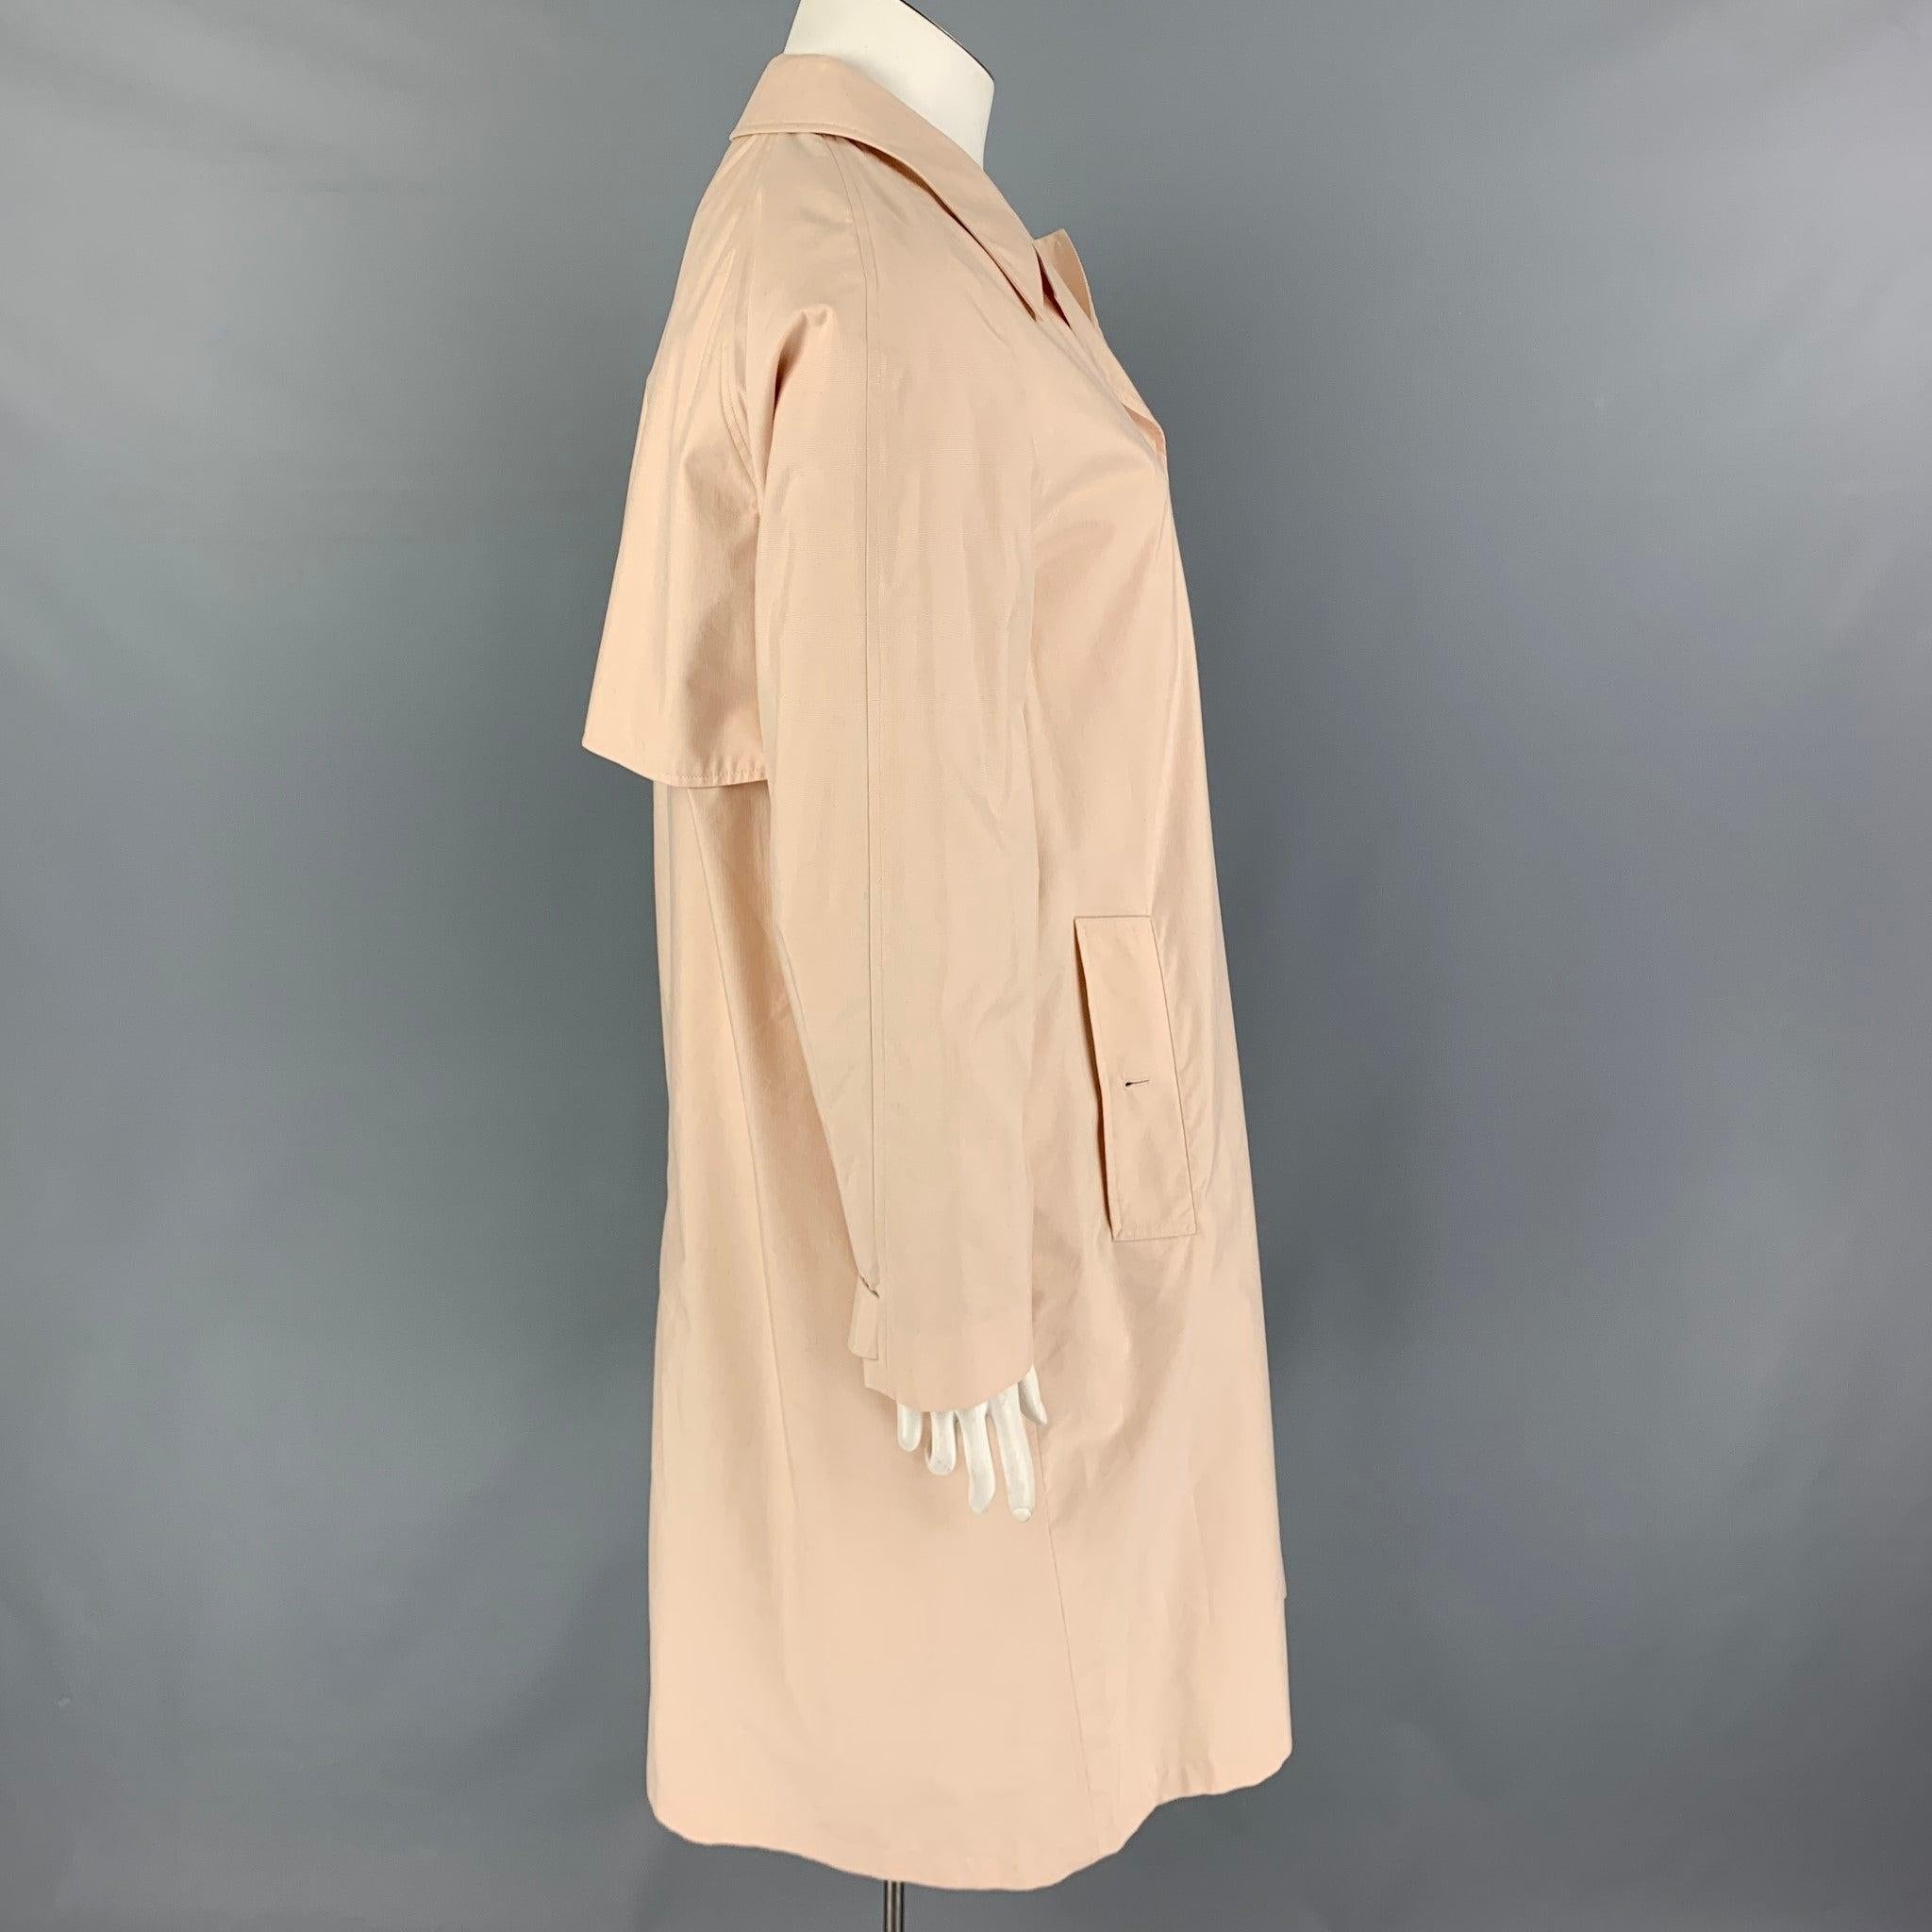 BURBERRY LONDON coat comes in a cream material featuring a oversized fit, notch lapel, slit pockets, single back vent, and a hidden placket closure. Very Good
Pre-Owned Condition. 

Marked:   UK 12 / US 10 / IT 44 

Measurements: 
 
Shoulder: 17